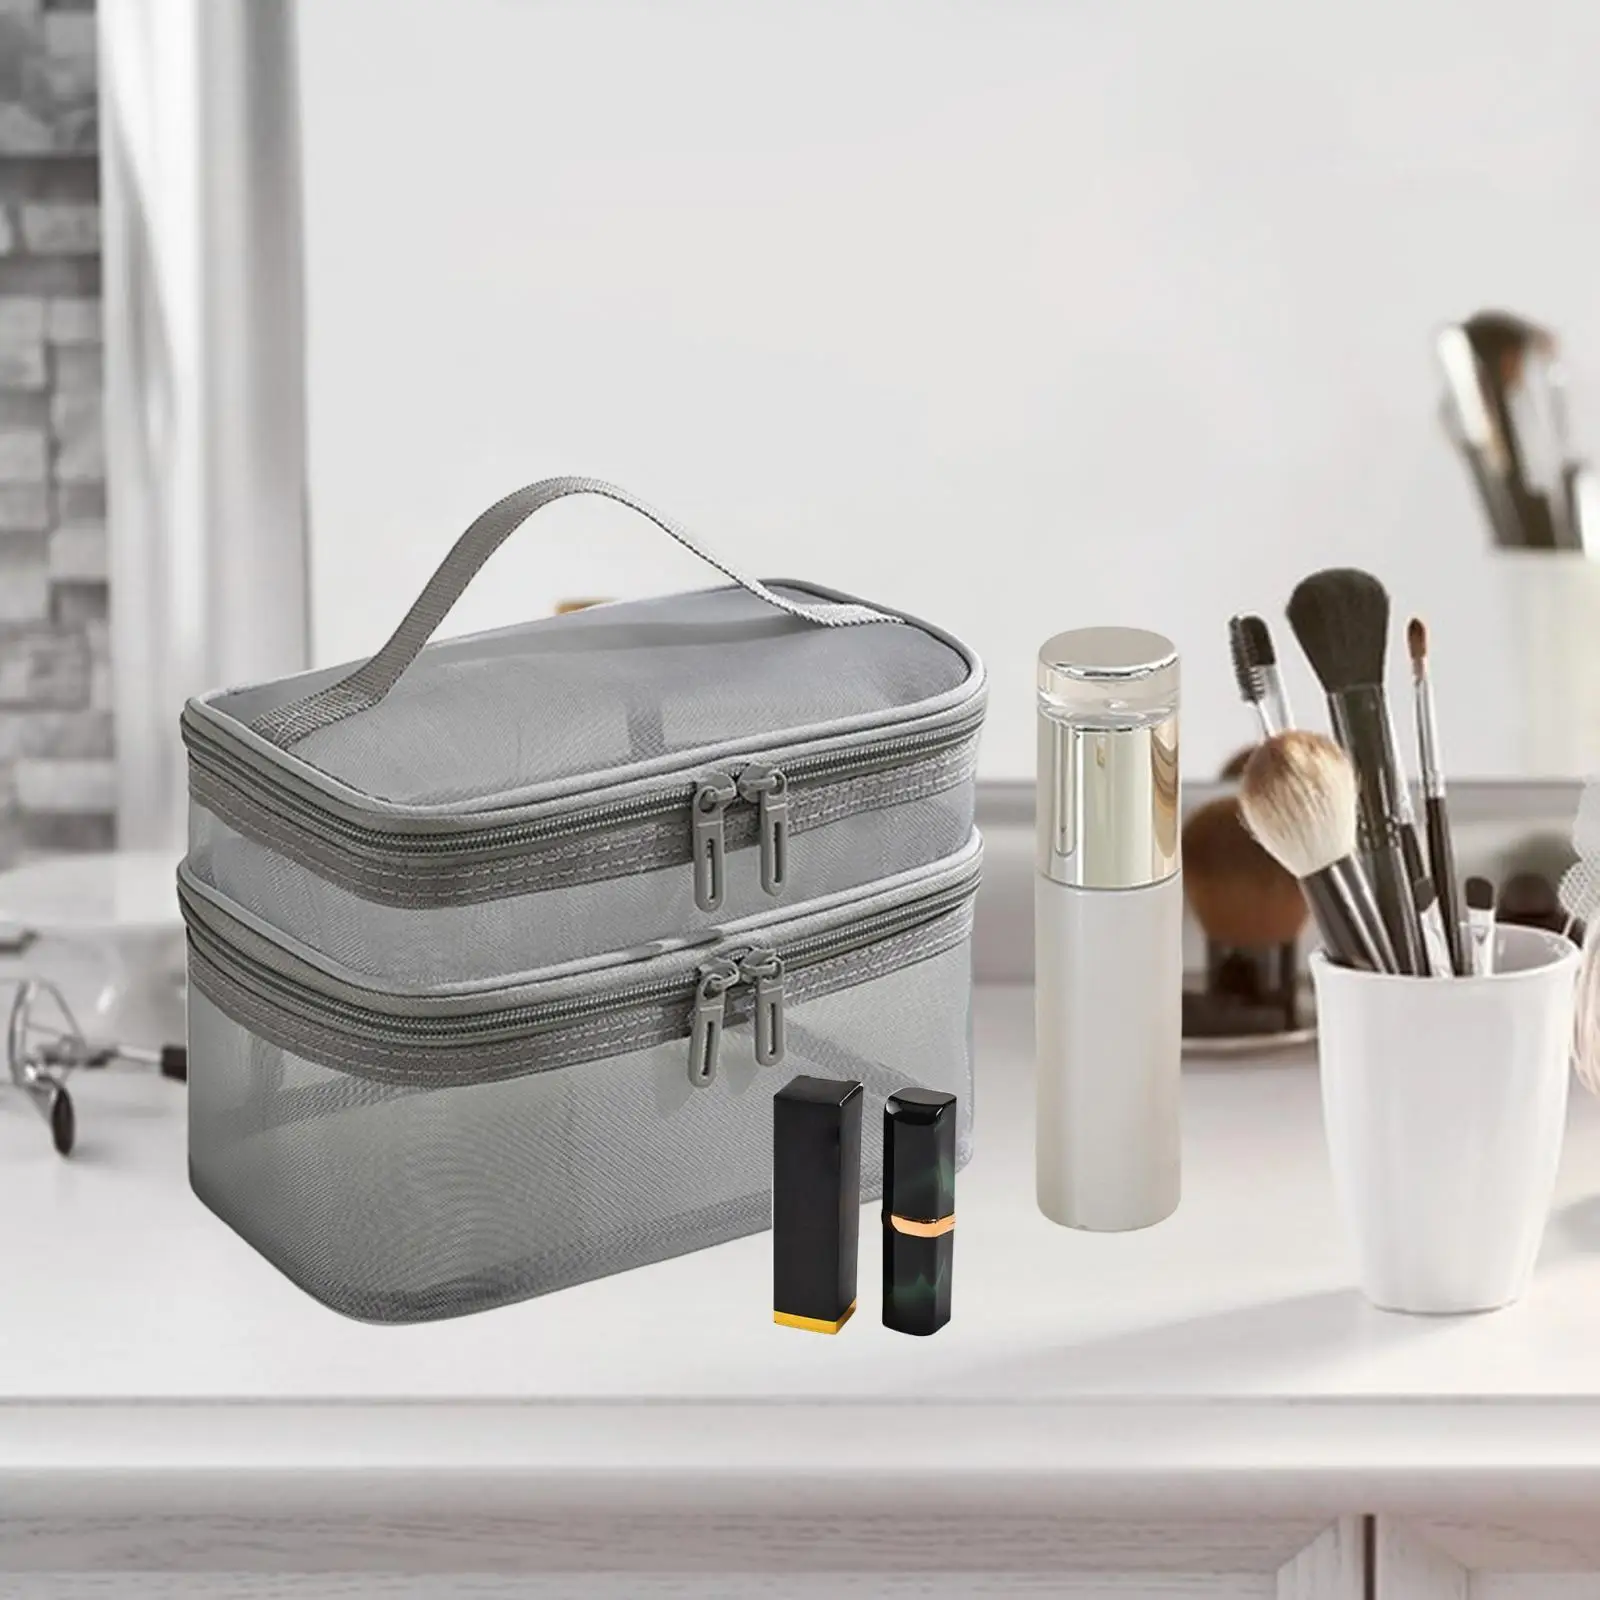 Double Layer Toiletry Bag with Zipper Portable Handbag Women Makeup Bag for Full Size Bottles Accessories Brushes Set Toiletries